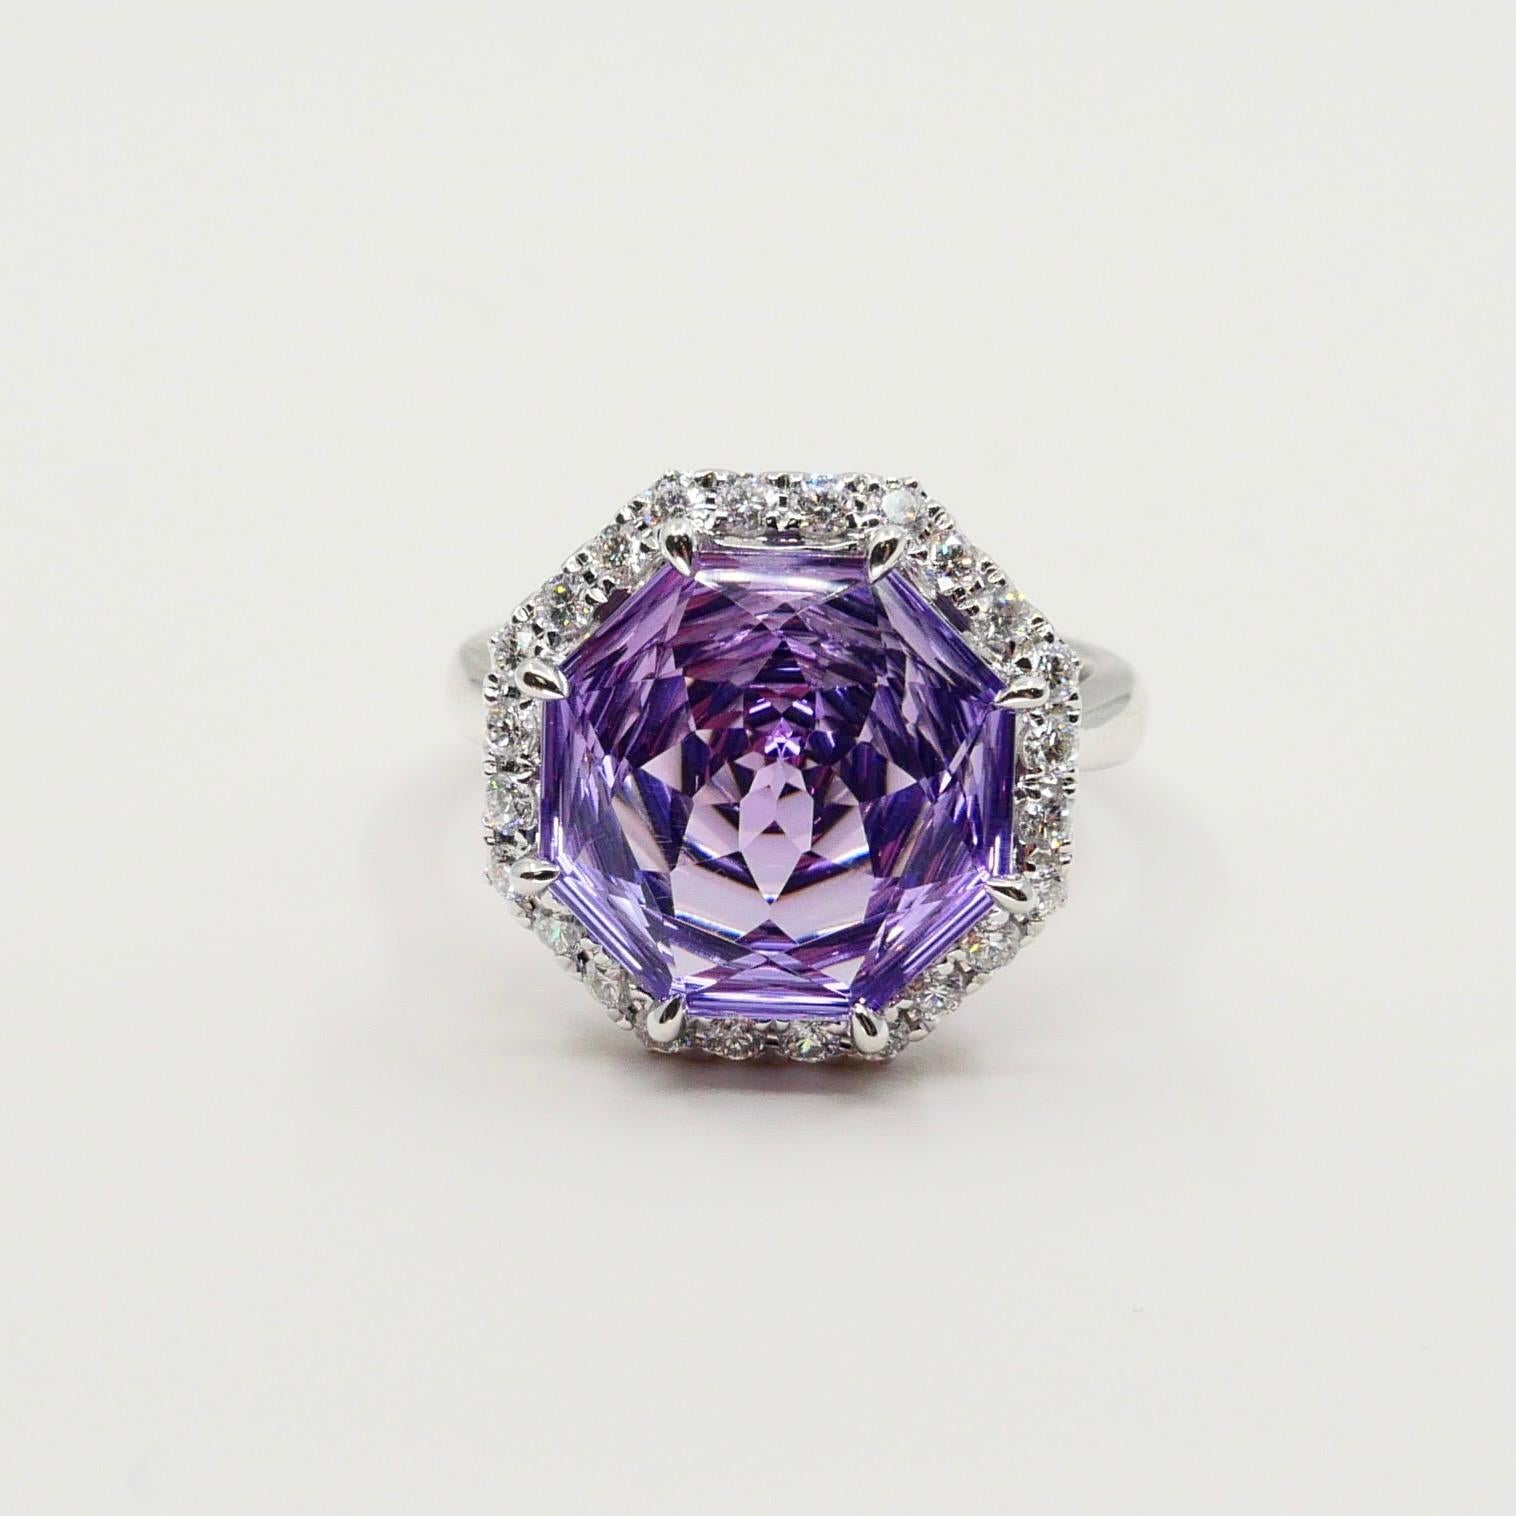 5.32 Carat Flower Cut Amethyst and Diamond Cocktail Ring, Statement Ring 1